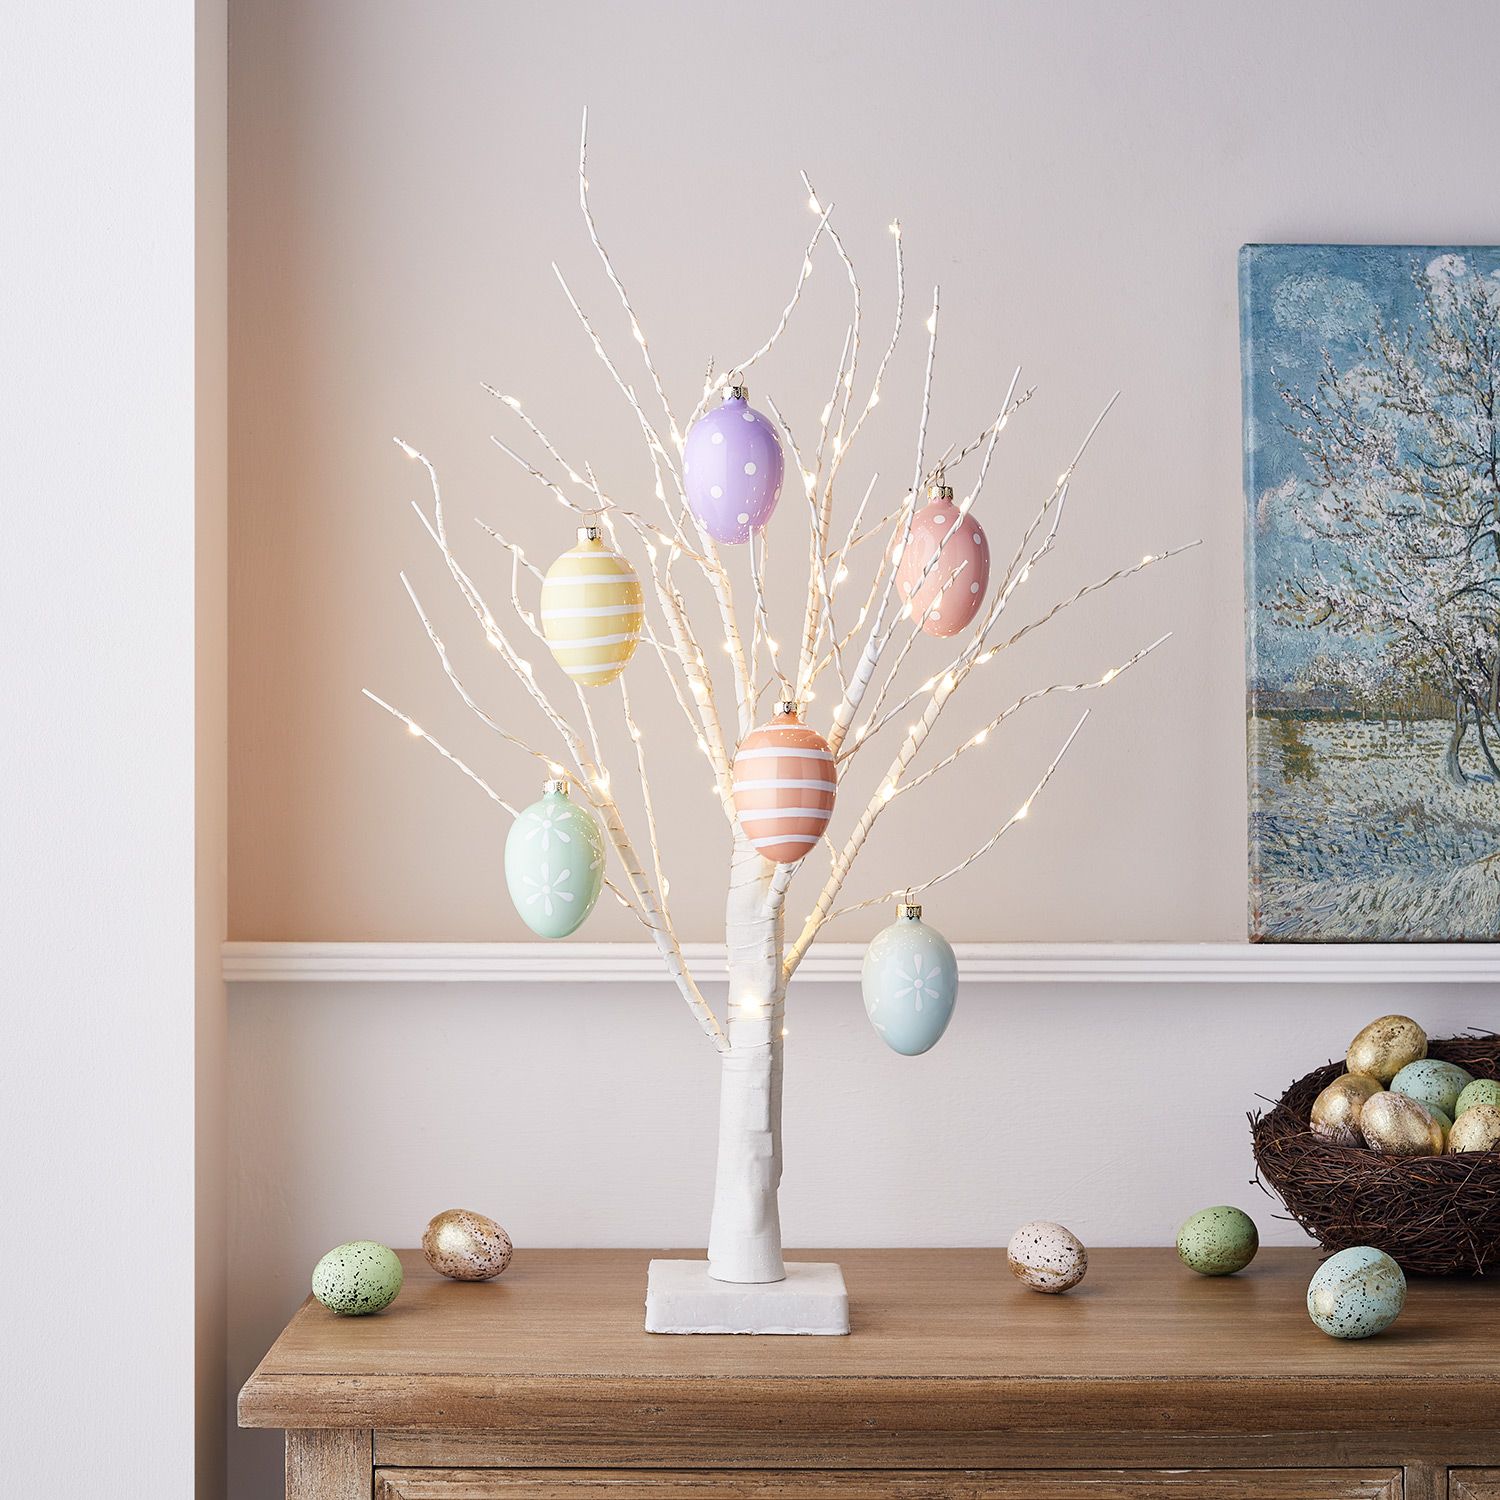 Sparkly Multi Coloured Easter Egg Hanging Tree Home Decoration 